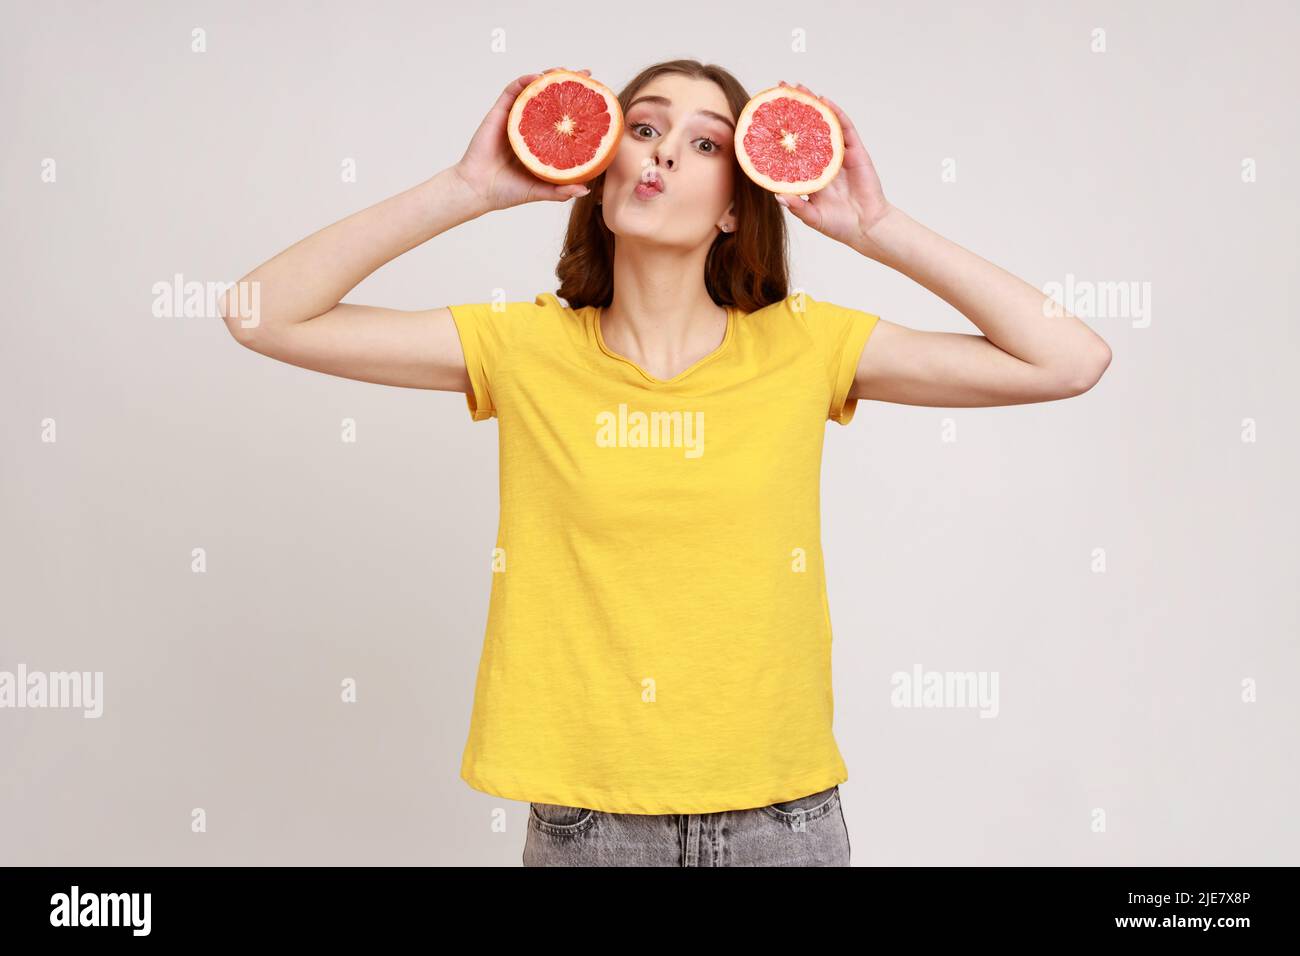 Portrait of positive teenager girl with dark hair holding two half slices of grapefruit with funny expression, making kissing gesture, looking at camera. Indoor studio shot isolated on gray background Stock Photo